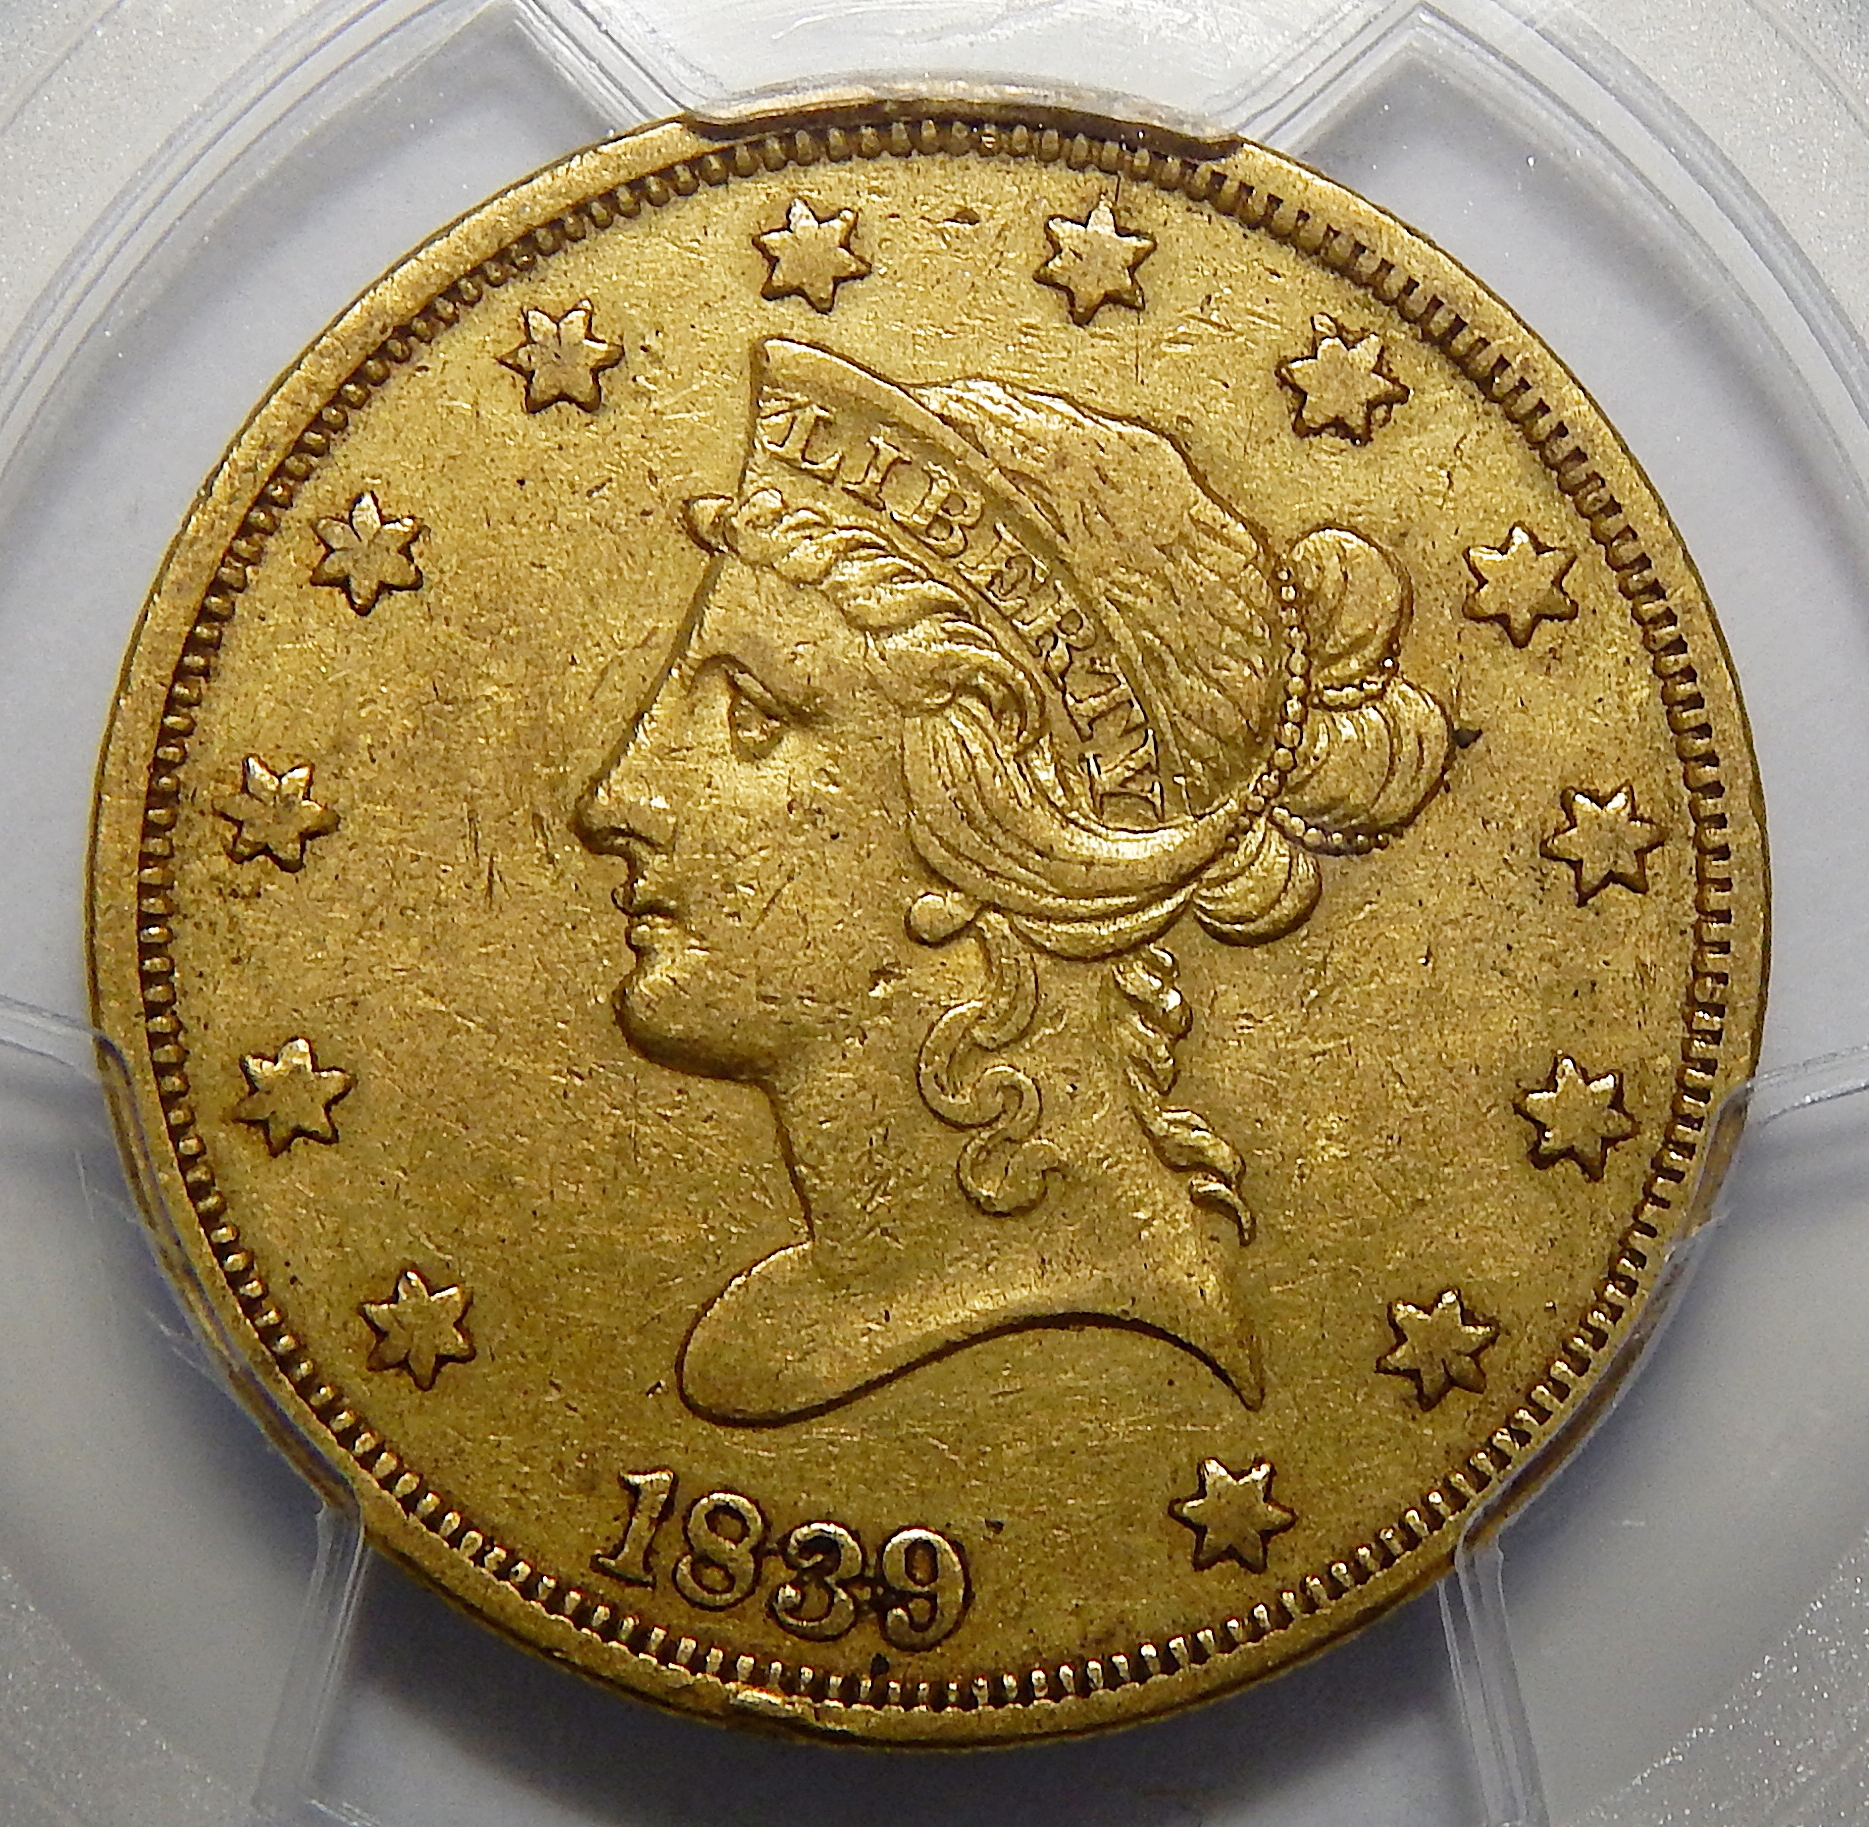 Liberty Head $10 (1838-1907) - Coins for sale on Collectors Corner